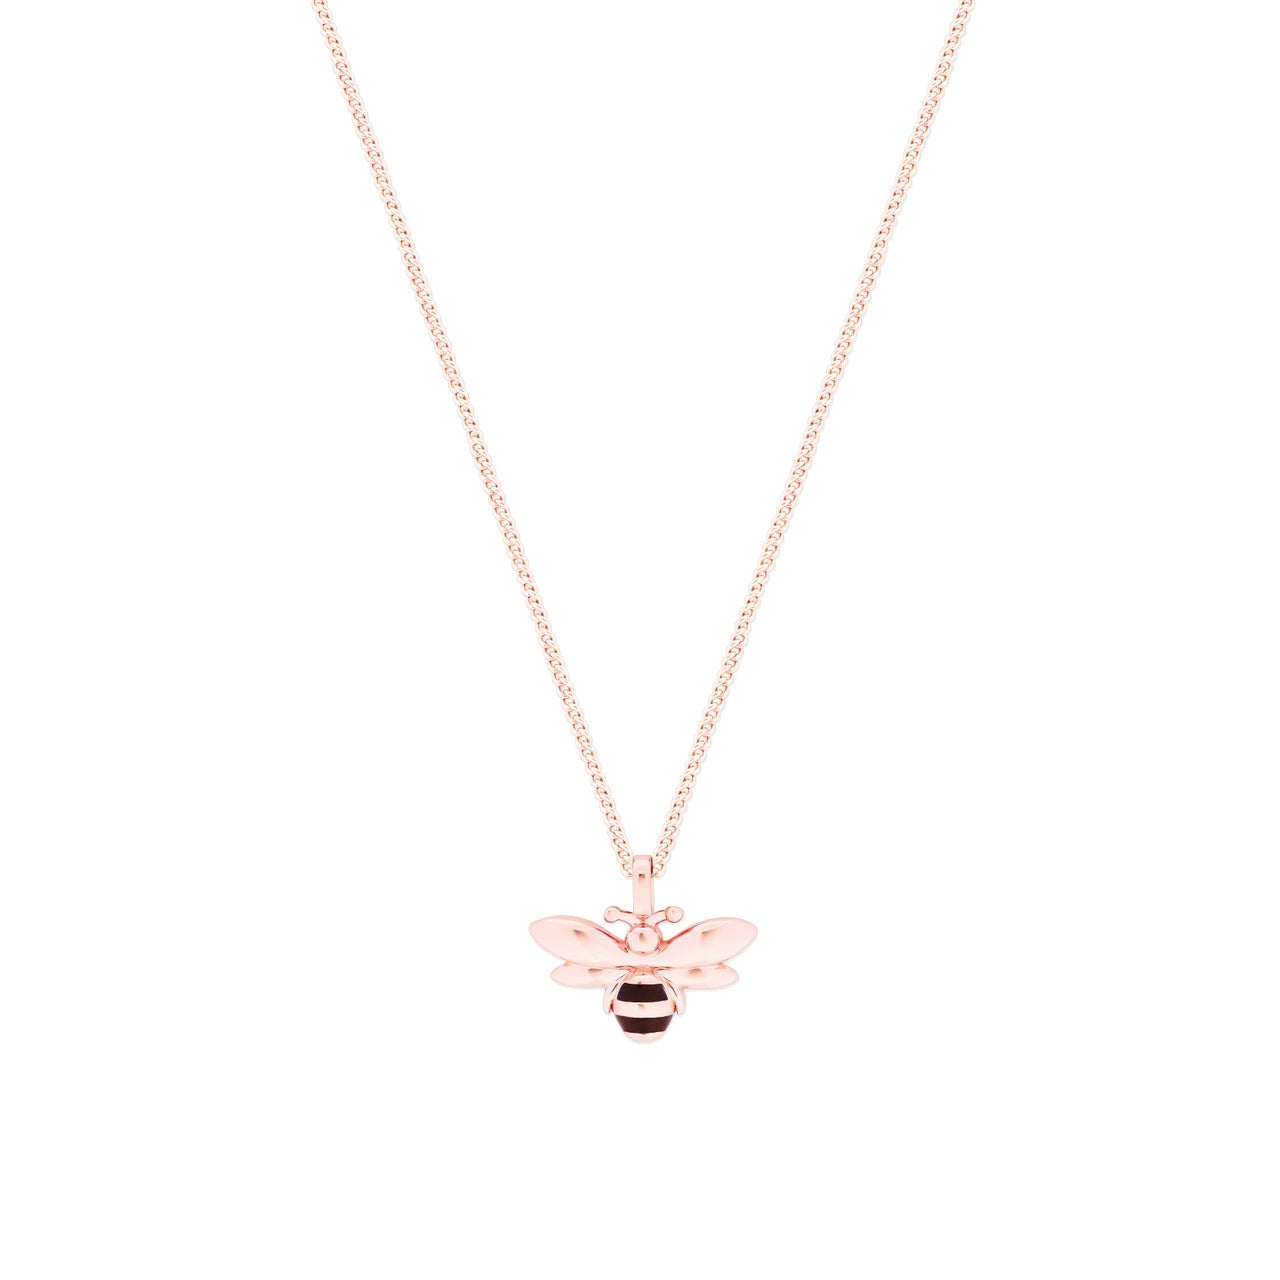 Tipperary Crystal Pendant - Bees Mini - Rose Gold Plated